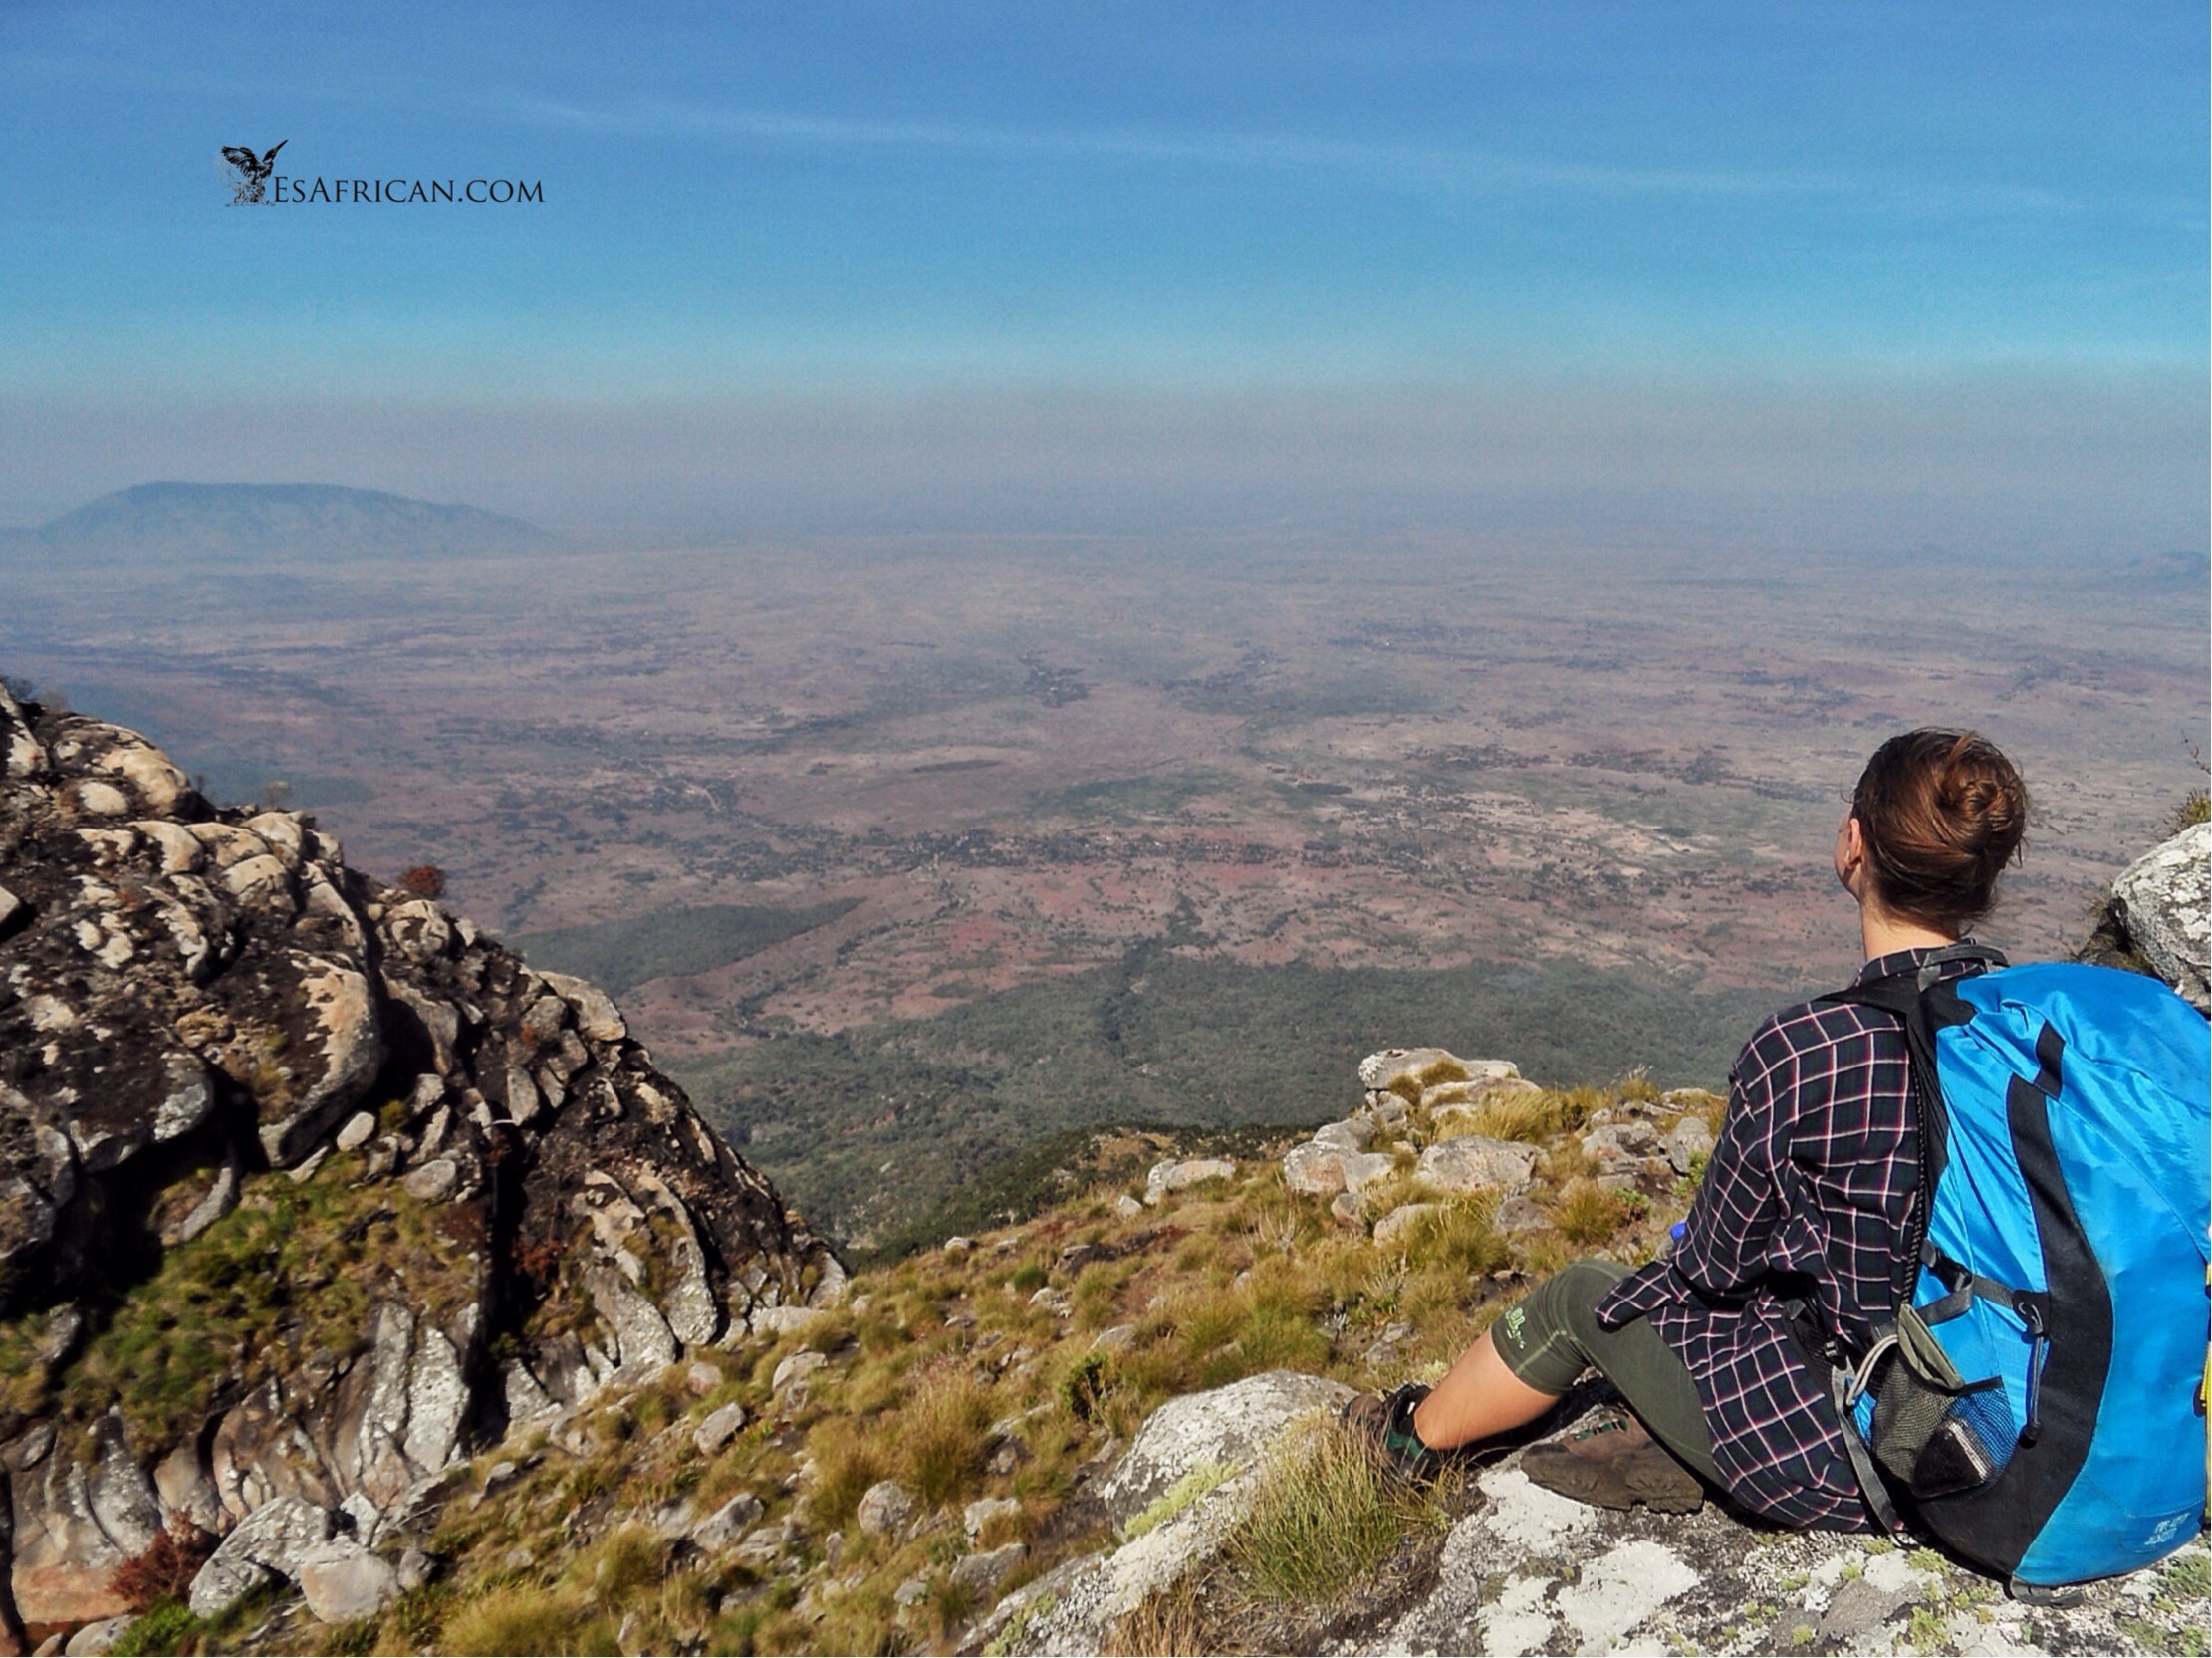 Mulanje Mountain view from the plateau - where can I go next? Or....where can I reach at the Lake?